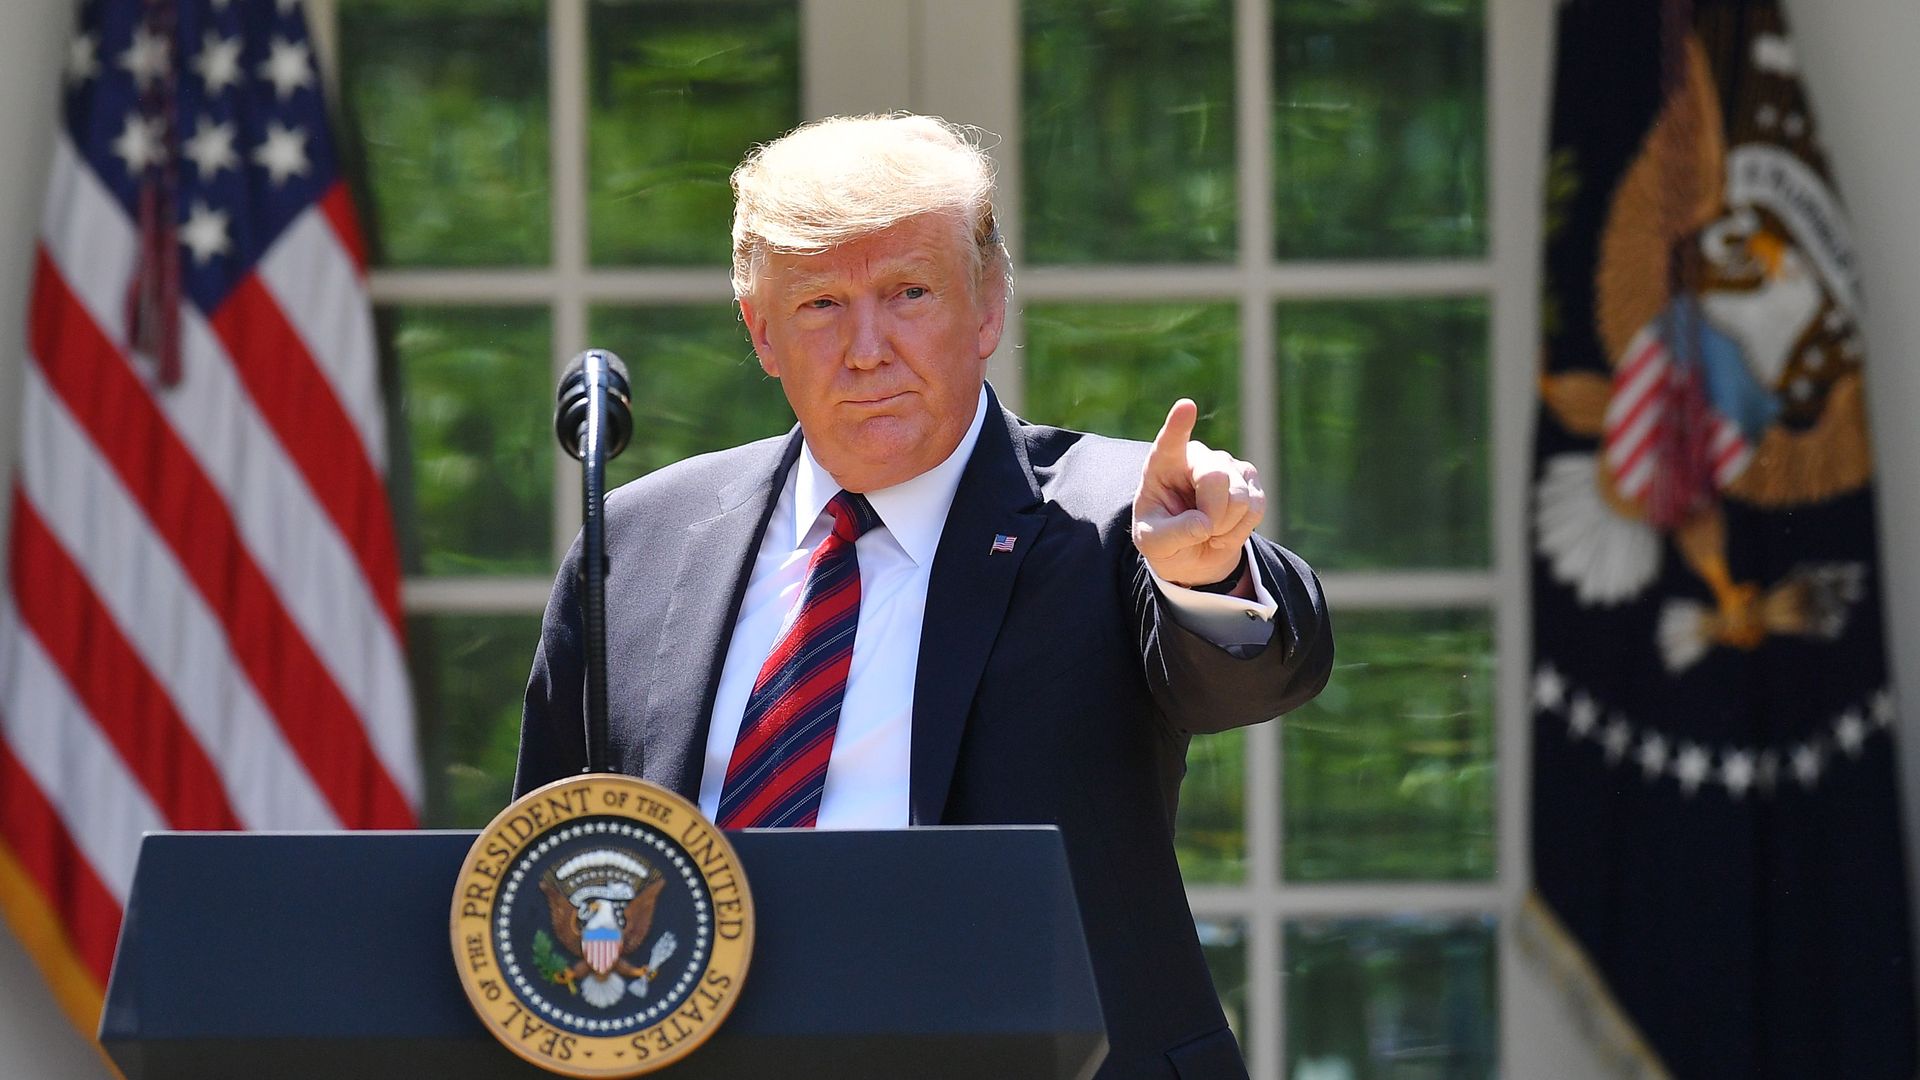 Trump points at the Rose Garden of the White House on May 16